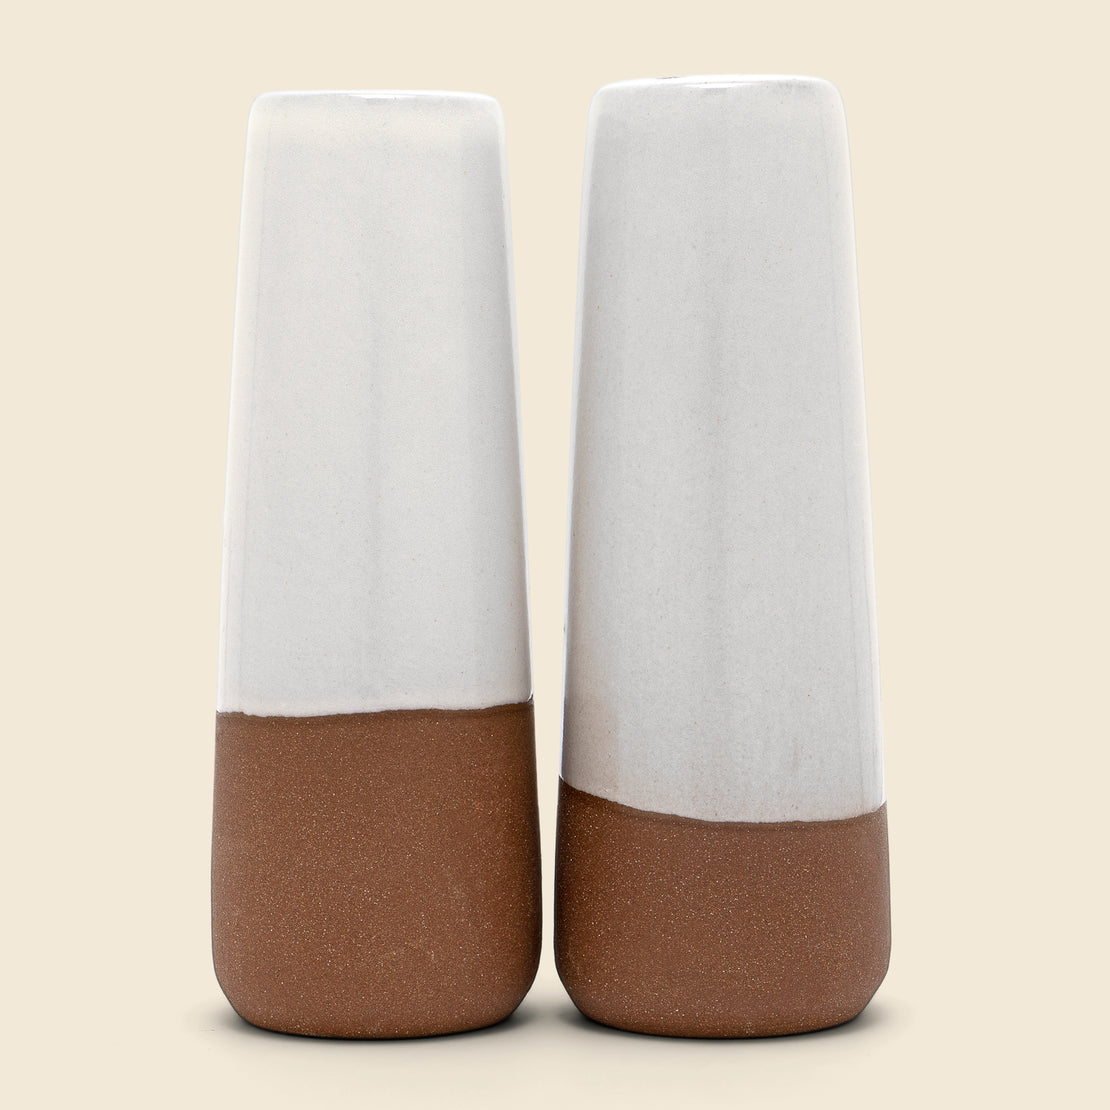 Maya Salt & Pepper Shakers - Home - STAG Provisions - Home - Kitchen - Tabletop